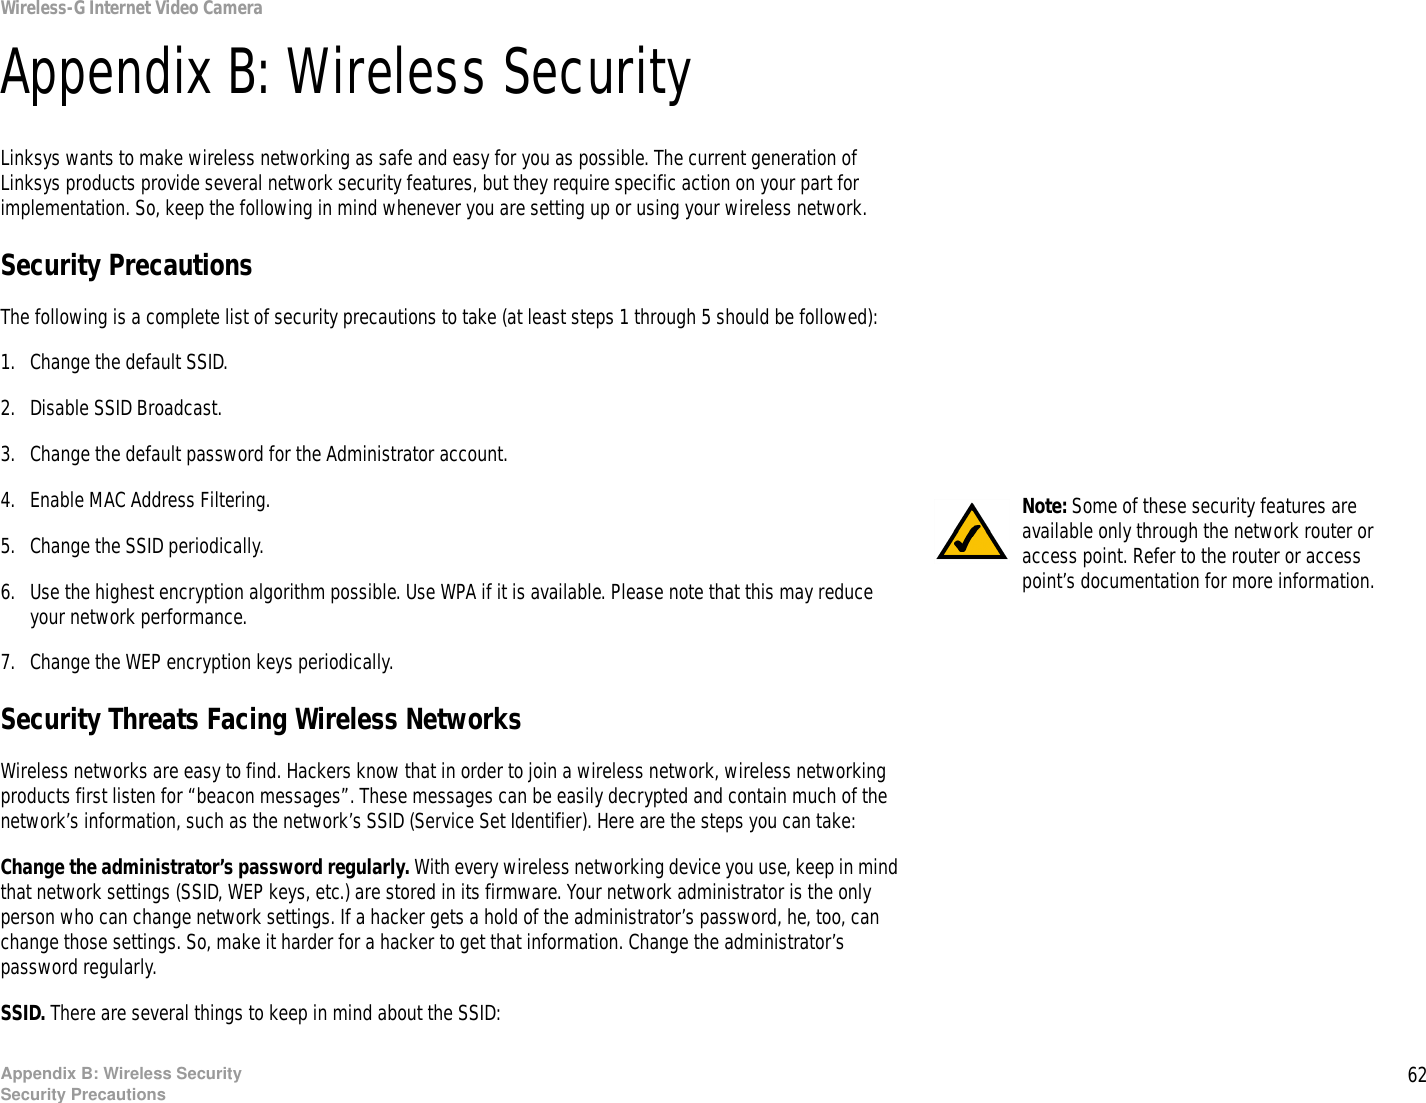 62Appendix B: Wireless SecuritySecurity PrecautionsWireless-G Internet Video CameraAppendix B: Wireless SecurityLinksys wants to make wireless networking as safe and easy for you as possible. The current generation of Linksys products provide several network security features, but they require specific action on your part for implementation. So, keep the following in mind whenever you are setting up or using your wireless network.Security PrecautionsThe following is a complete list of security precautions to take (at least steps 1 through 5 should be followed):1. Change the default SSID. 2. Disable SSID Broadcast. 3. Change the default password for the Administrator account. 4. Enable MAC Address Filtering. 5. Change the SSID periodically. 6. Use the highest encryption algorithm possible. Use WPA if it is available. Please note that this may reduce your network performance. 7. Change the WEP encryption keys periodically. Security Threats Facing Wireless Networks Wireless networks are easy to find. Hackers know that in order to join a wireless network, wireless networking products first listen for “beacon messages”. These messages can be easily decrypted and contain much of the network’s information, such as the network’s SSID (Service Set Identifier). Here are the steps you can take:Change the administrator’s password regularly. With every wireless networking device you use, keep in mind that network settings (SSID, WEP keys, etc.) are stored in its firmware. Your network administrator is the only person who can change network settings. If a hacker gets a hold of the administrator’s password, he, too, can change those settings. So, make it harder for a hacker to get that information. Change the administrator’s password regularly.SSID. There are several things to keep in mind about the SSID: Note: Some of these security features are available only through the network router or access point. Refer to the router or access point’s documentation for more information.